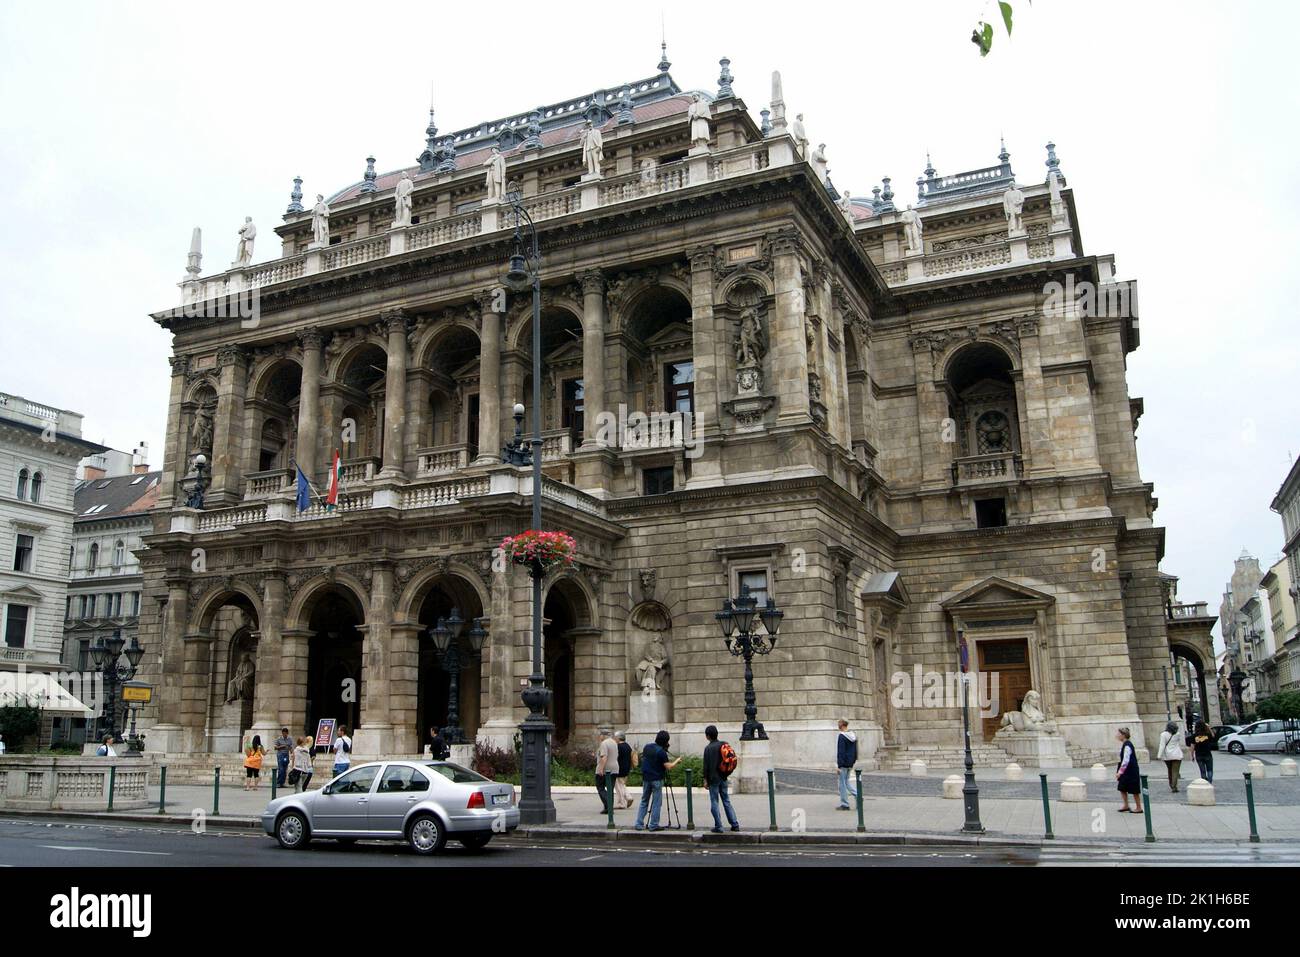 Hungarian State Opera House, built in neo-Renaissance style, opened in 1884, Budapest, Hungary Stock Photo